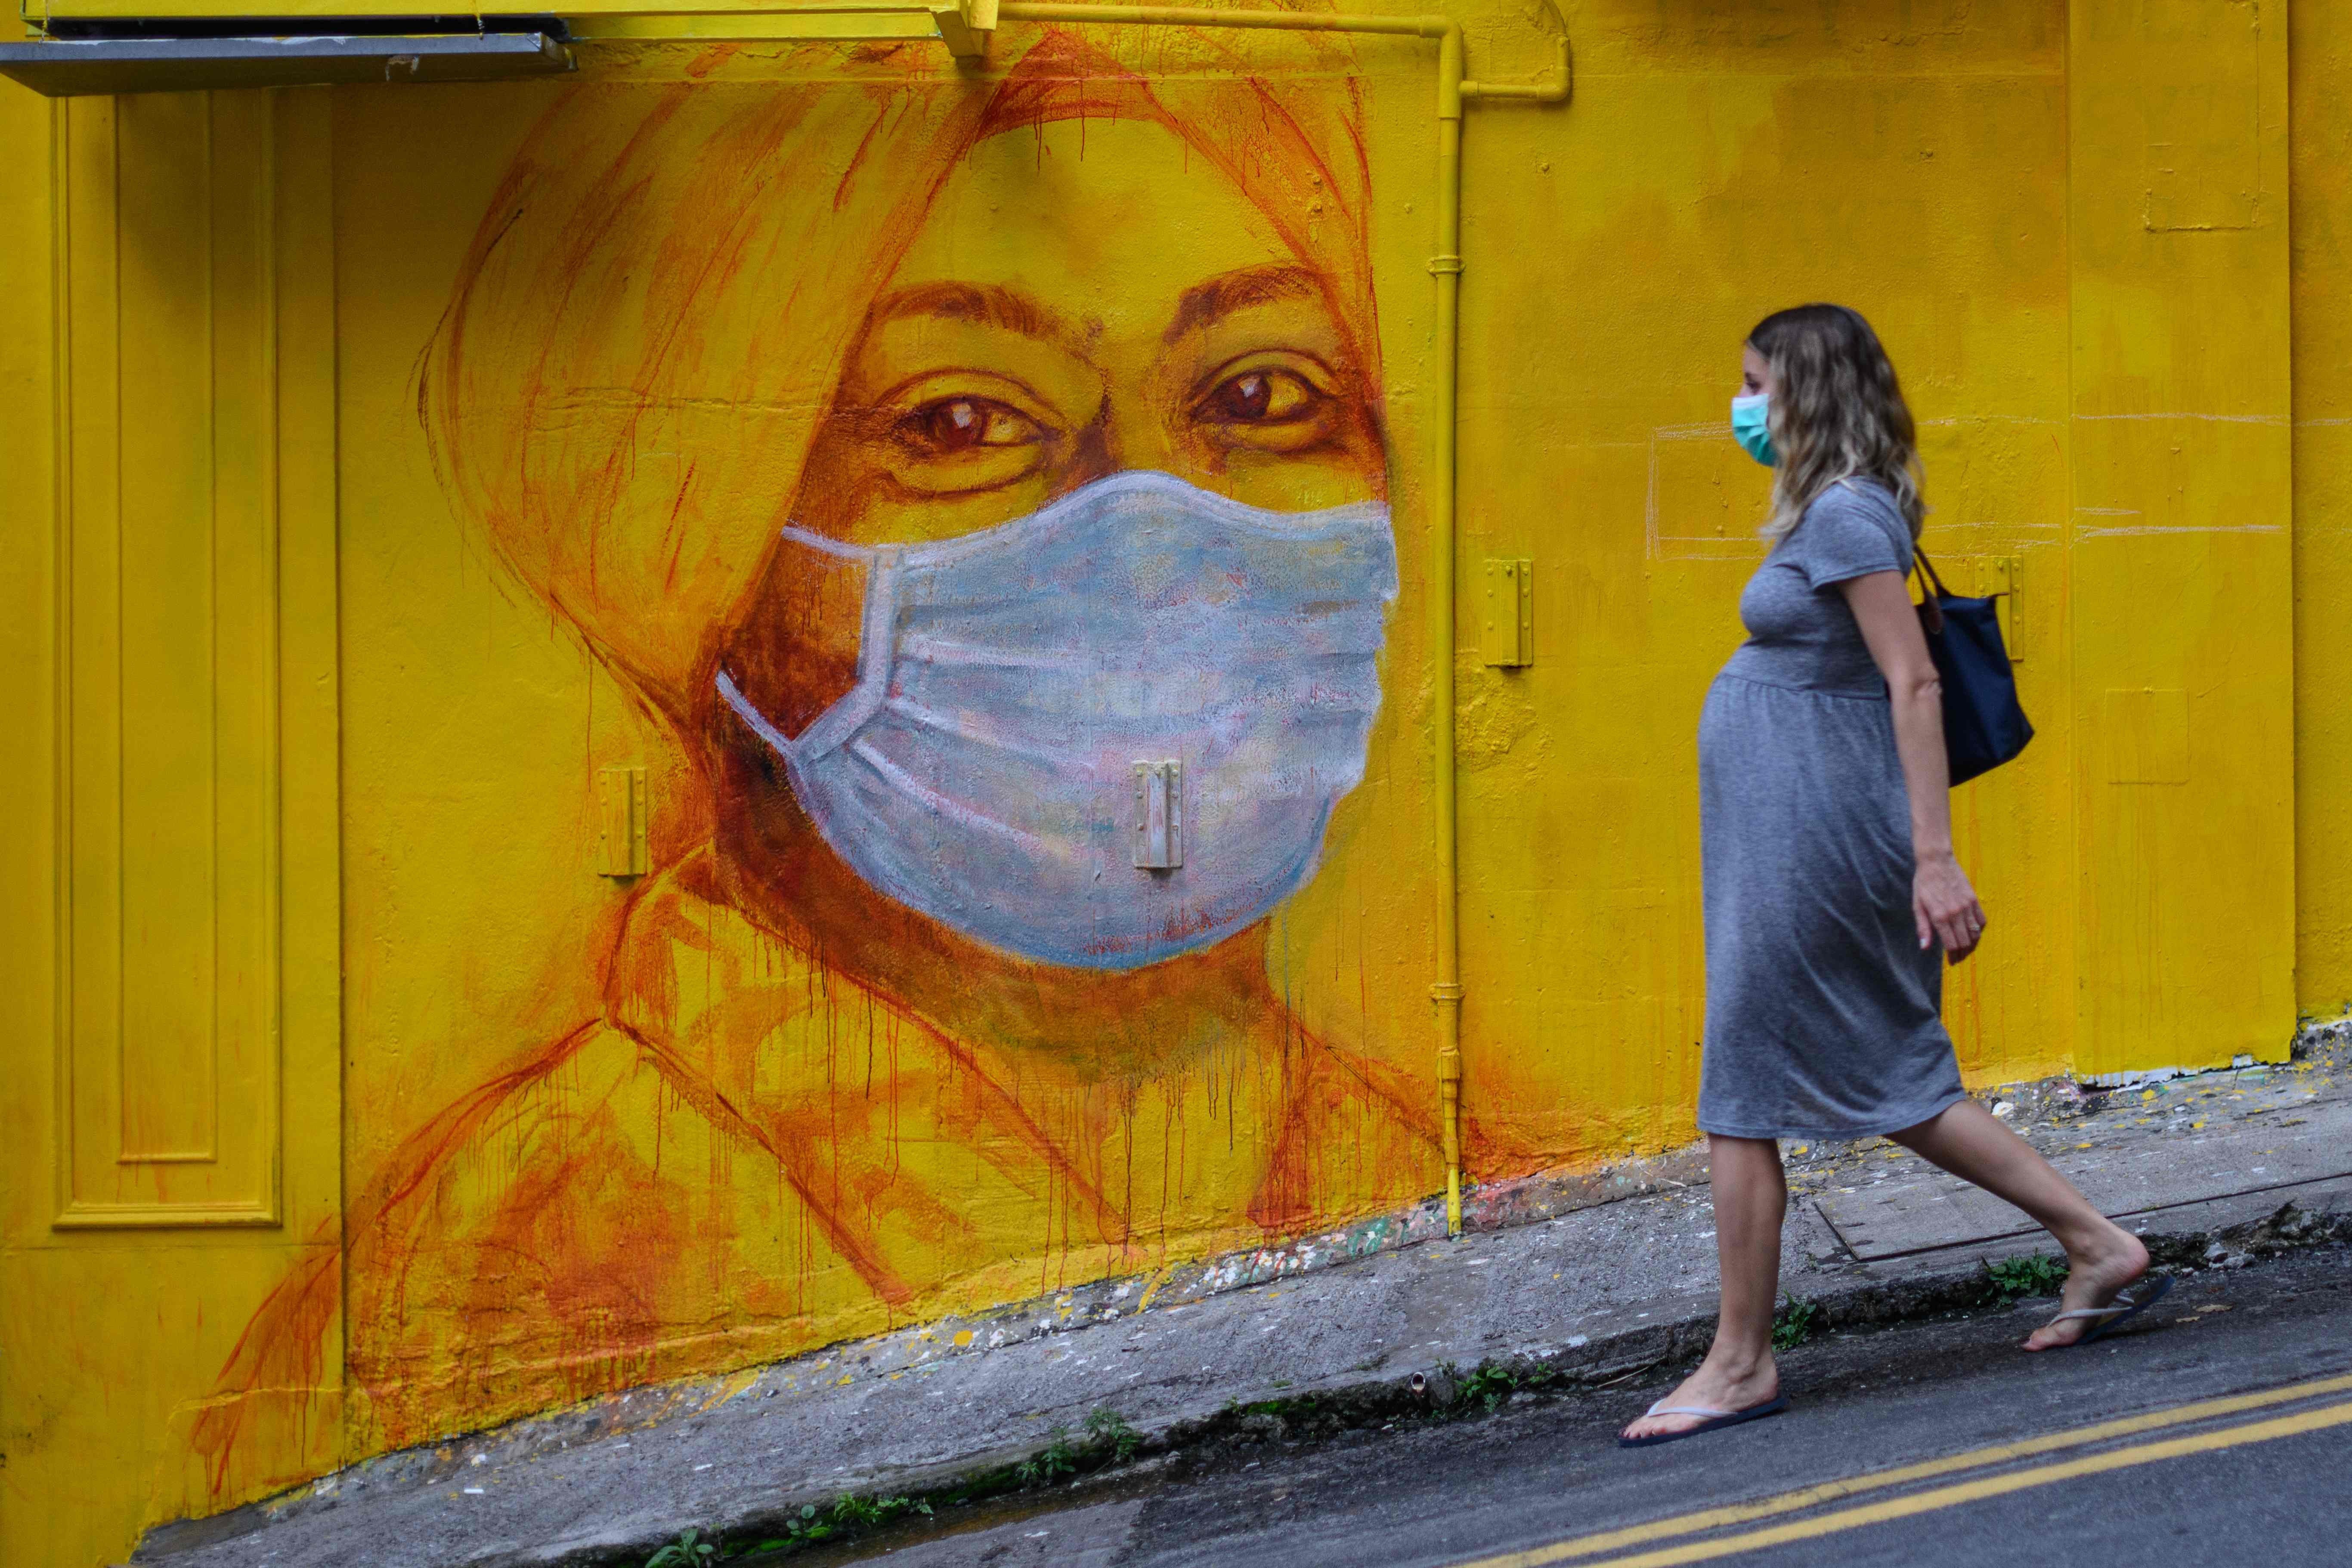 A pregnant woman wearing a mask walks past a street mural in Hong Kong on March 23. Photo: AFP